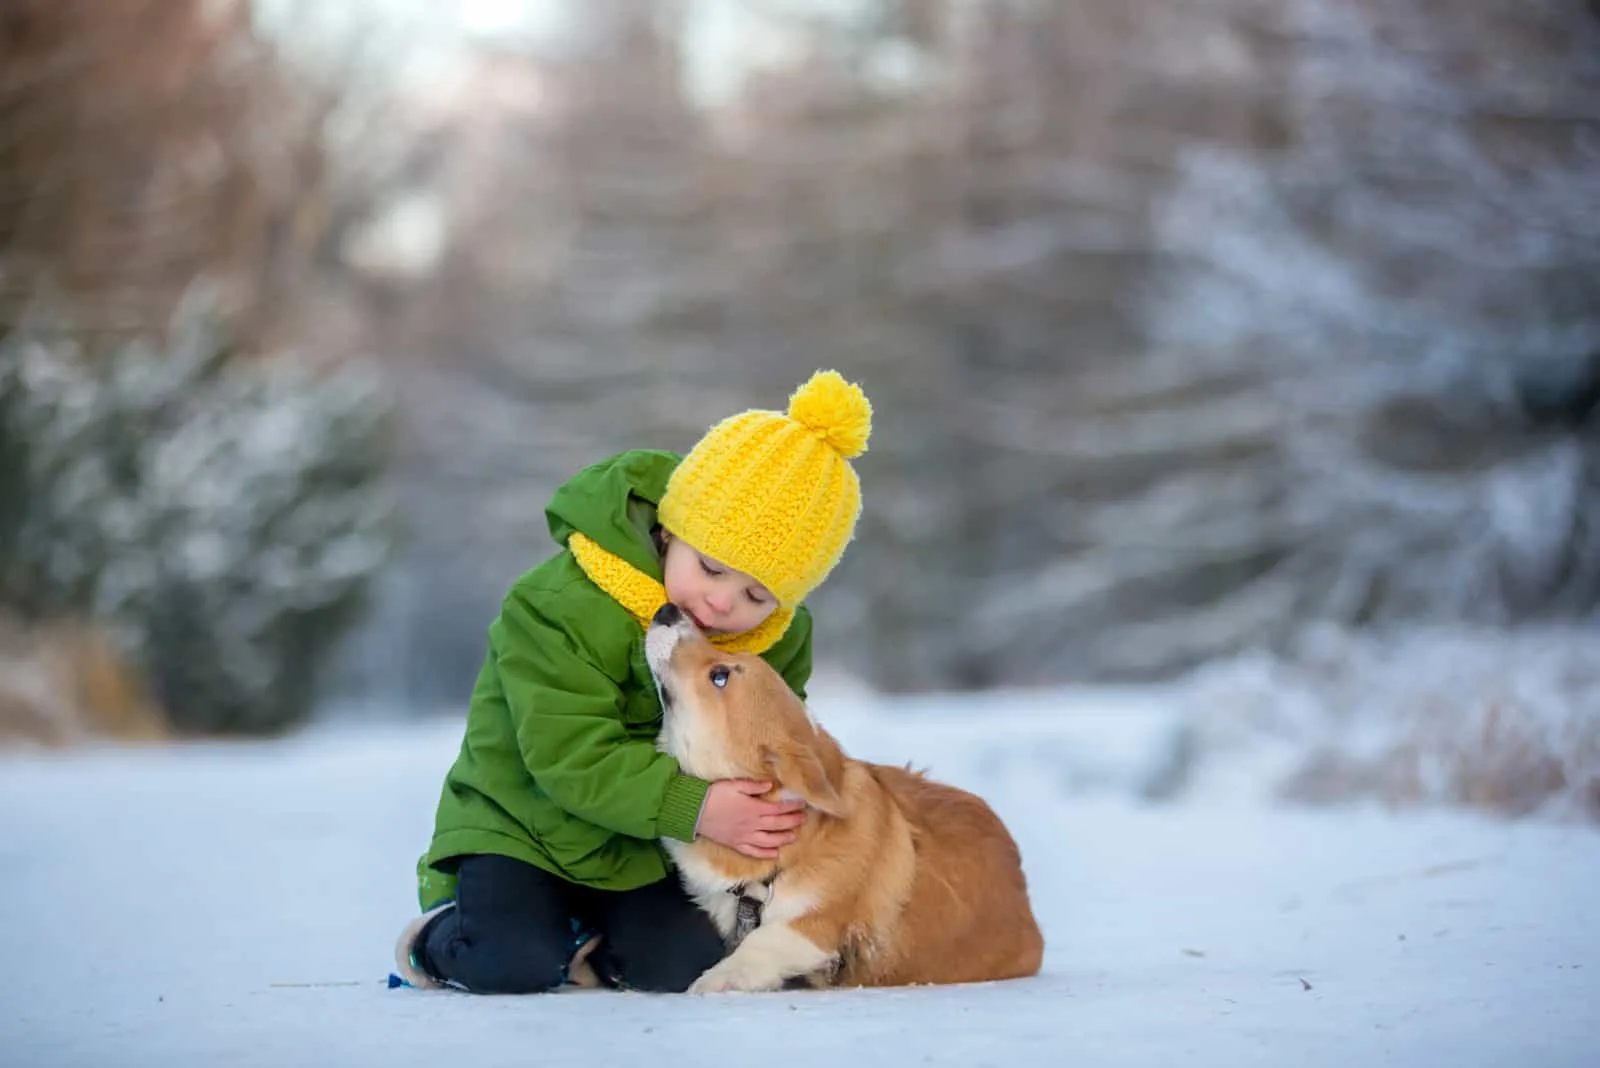 outside in the snow a child kisses a dog on the muzzle